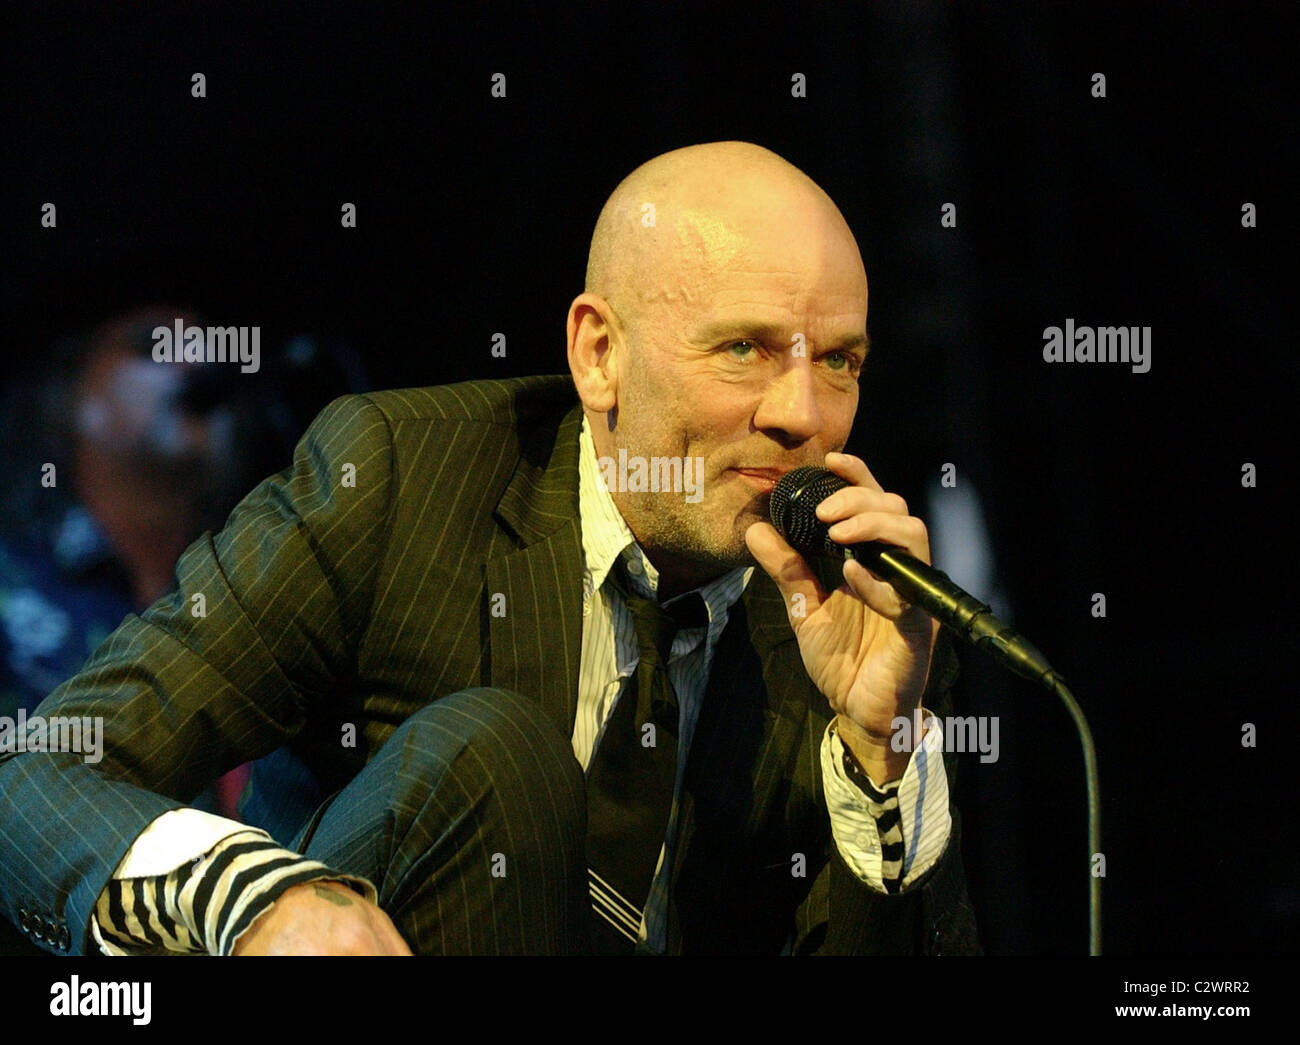 Michael Stipe of R.E.M perform a sold out concert at Westerpark Amsterdam, Netherlands - 02.07.08 Stock Photo